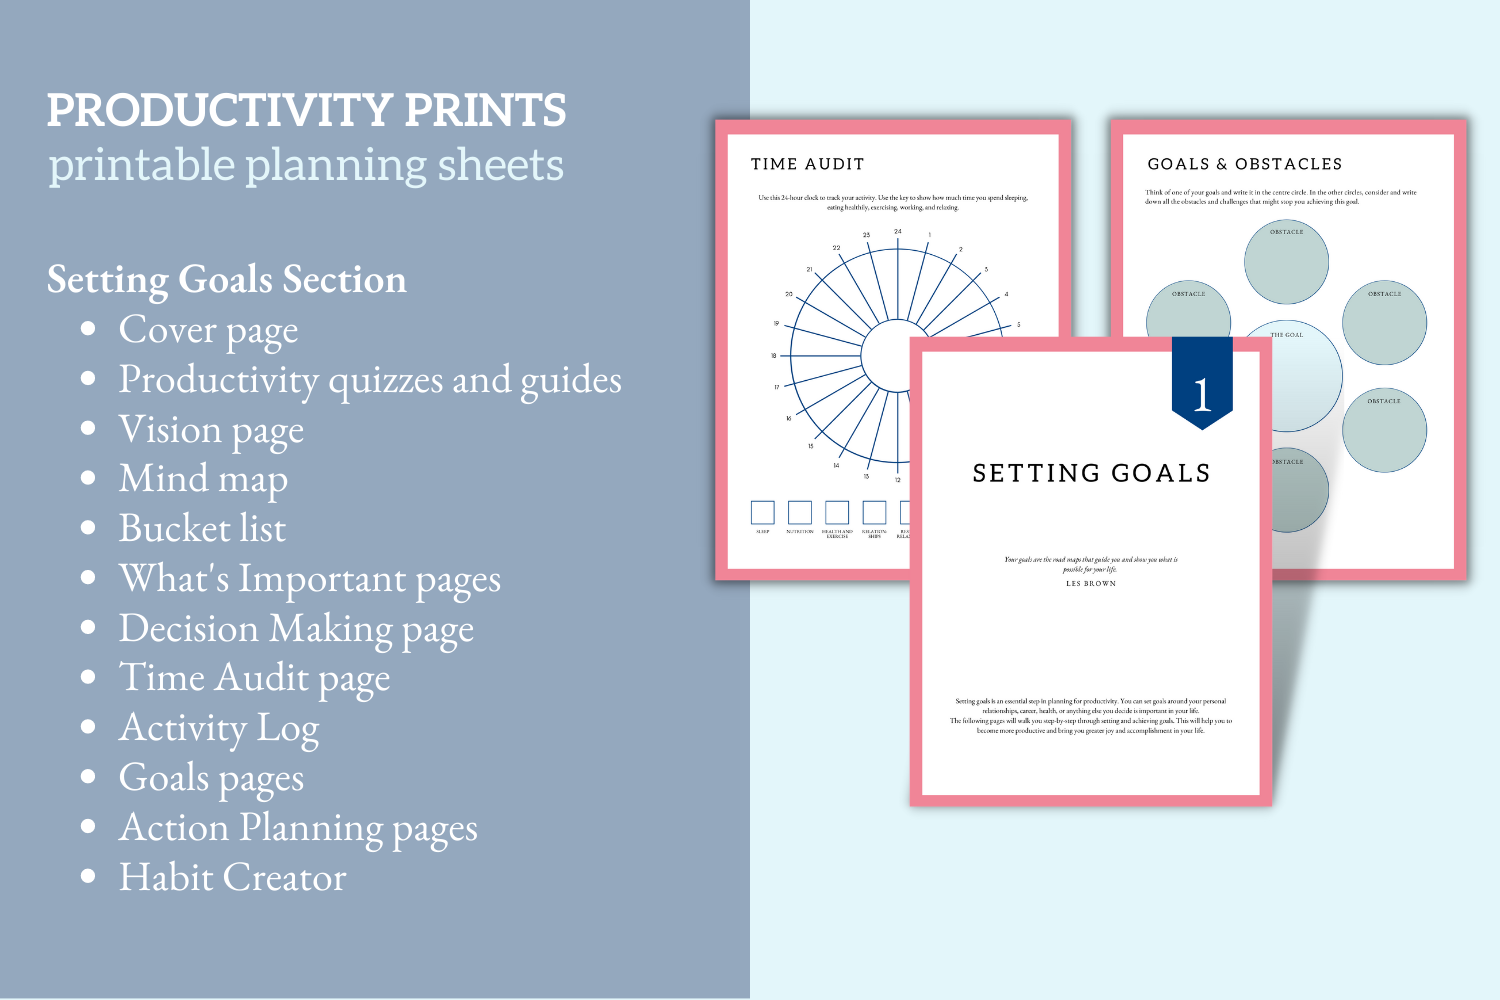 Productivity Prints printable planning sheets Setting Goals section mockup.